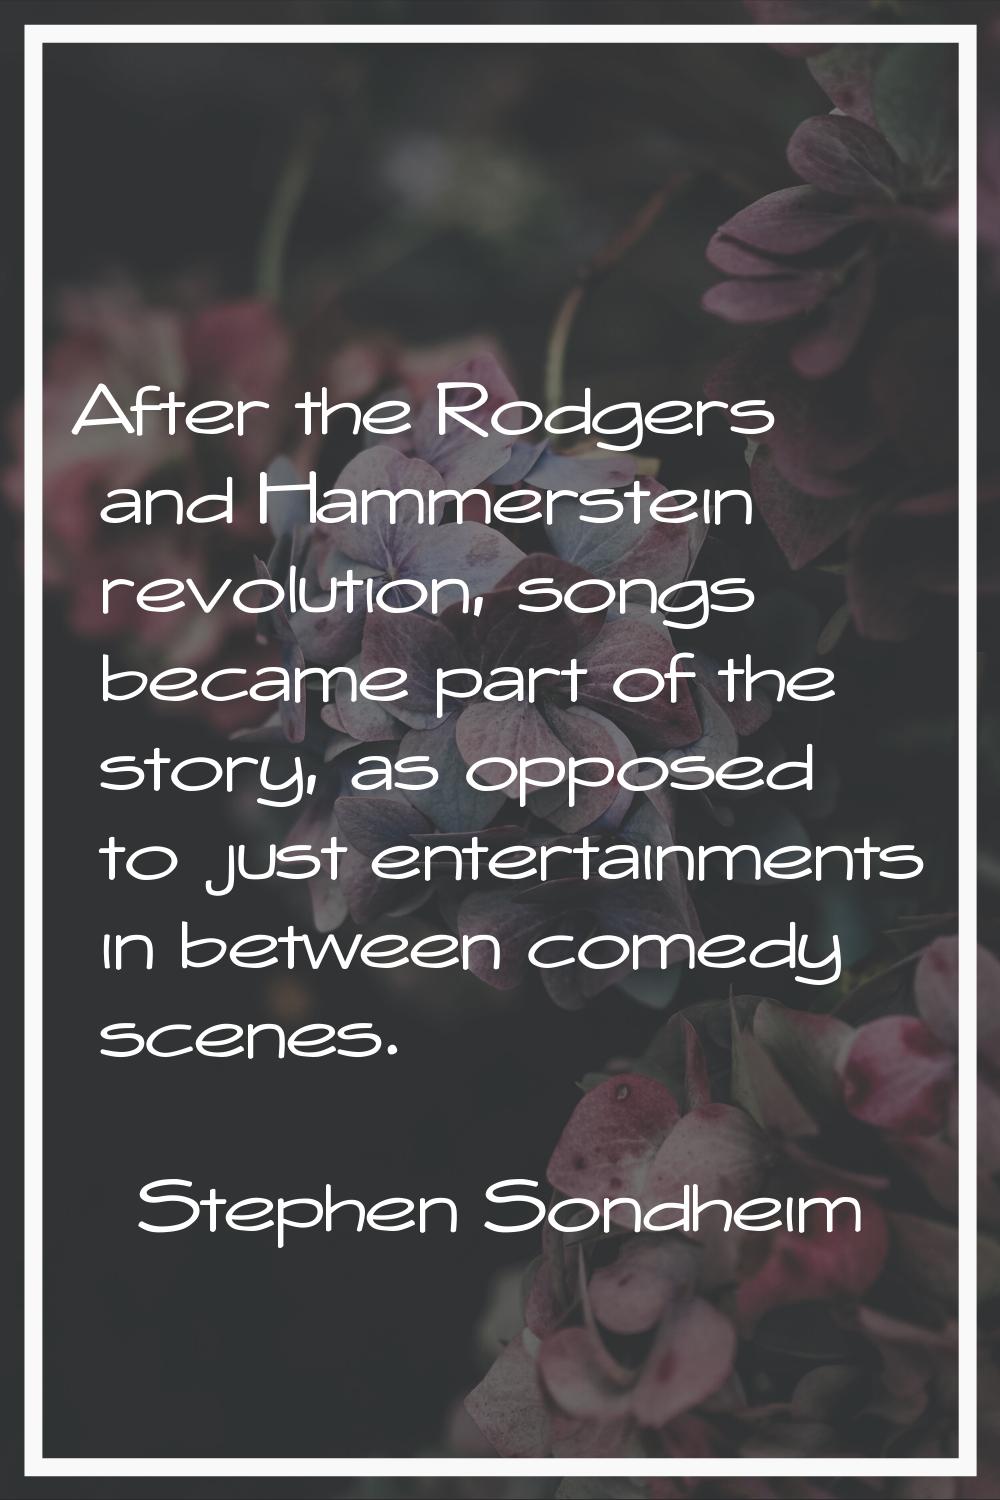 After the Rodgers and Hammerstein revolution, songs became part of the story, as opposed to just en